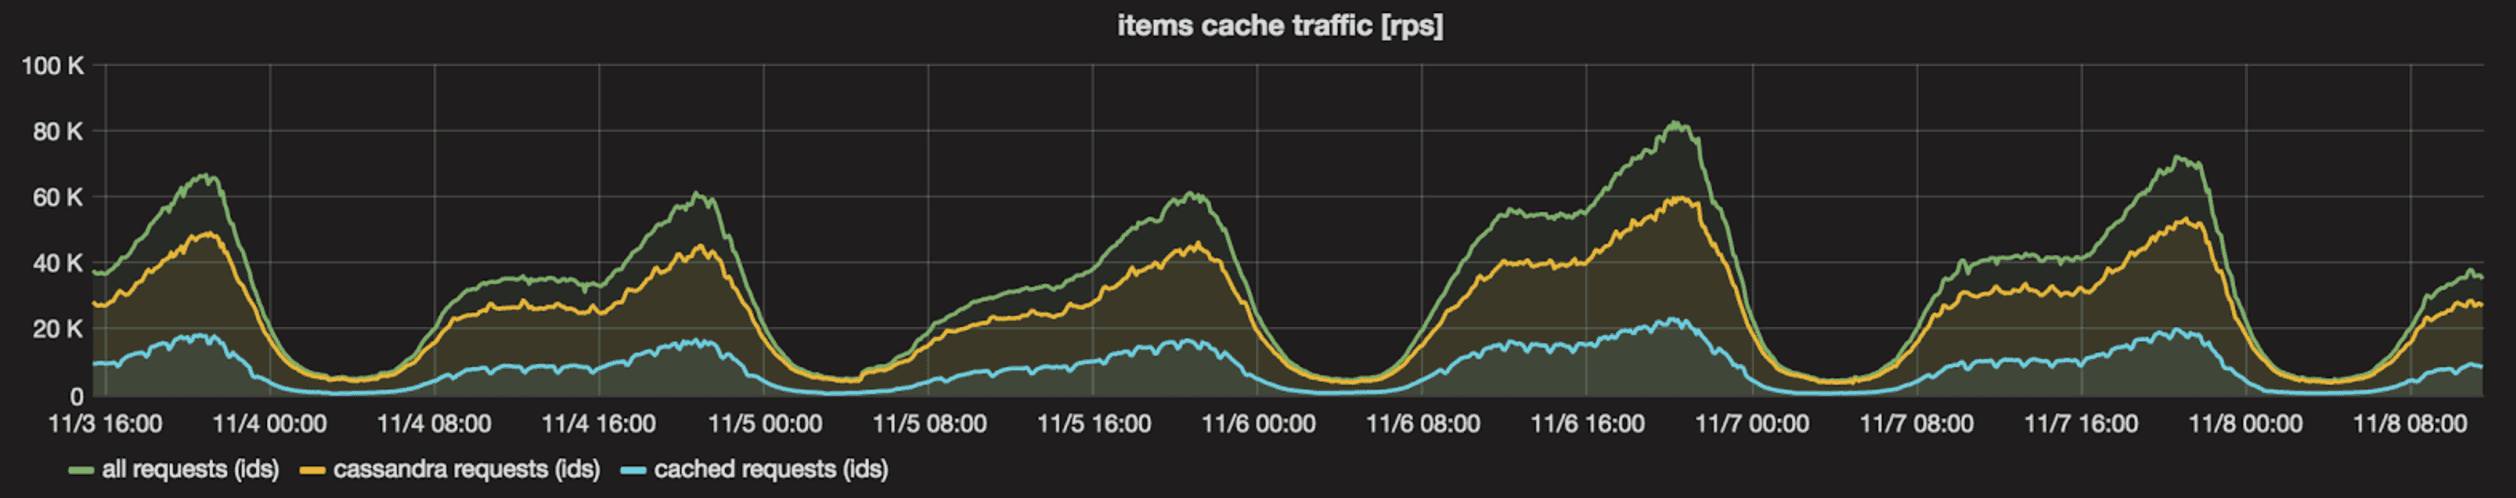 Items cache efficiency in production